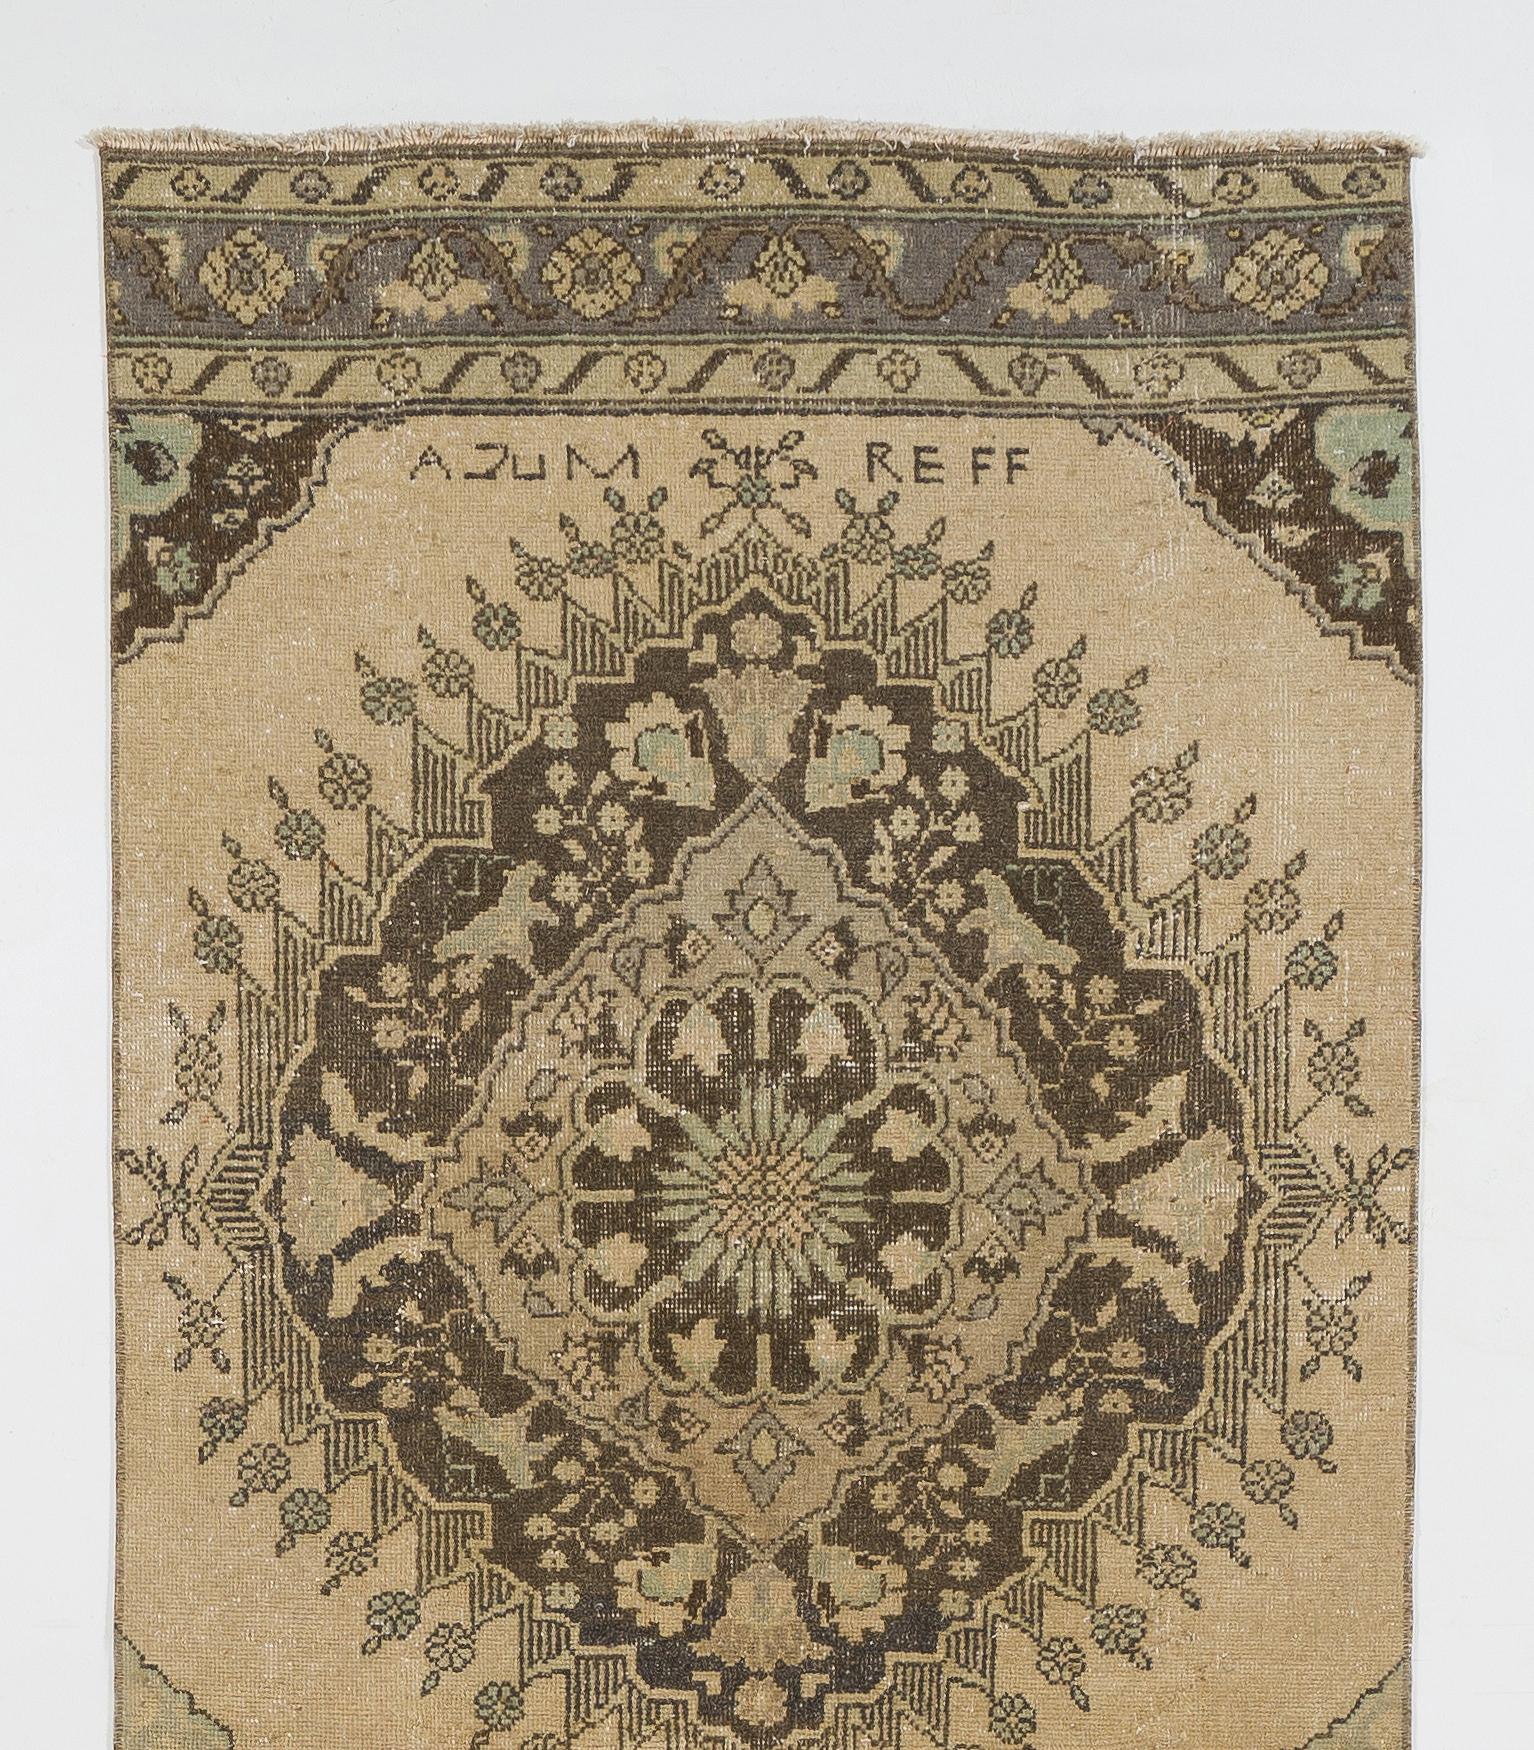 A vintage Turkish runner rug in shades of beige, brown and green colors featuring a well-drawn multiple linked medallions design. 

The rug was hand-knotted in the 1950s and has low wool on cotton foundation. It is in very good condition,